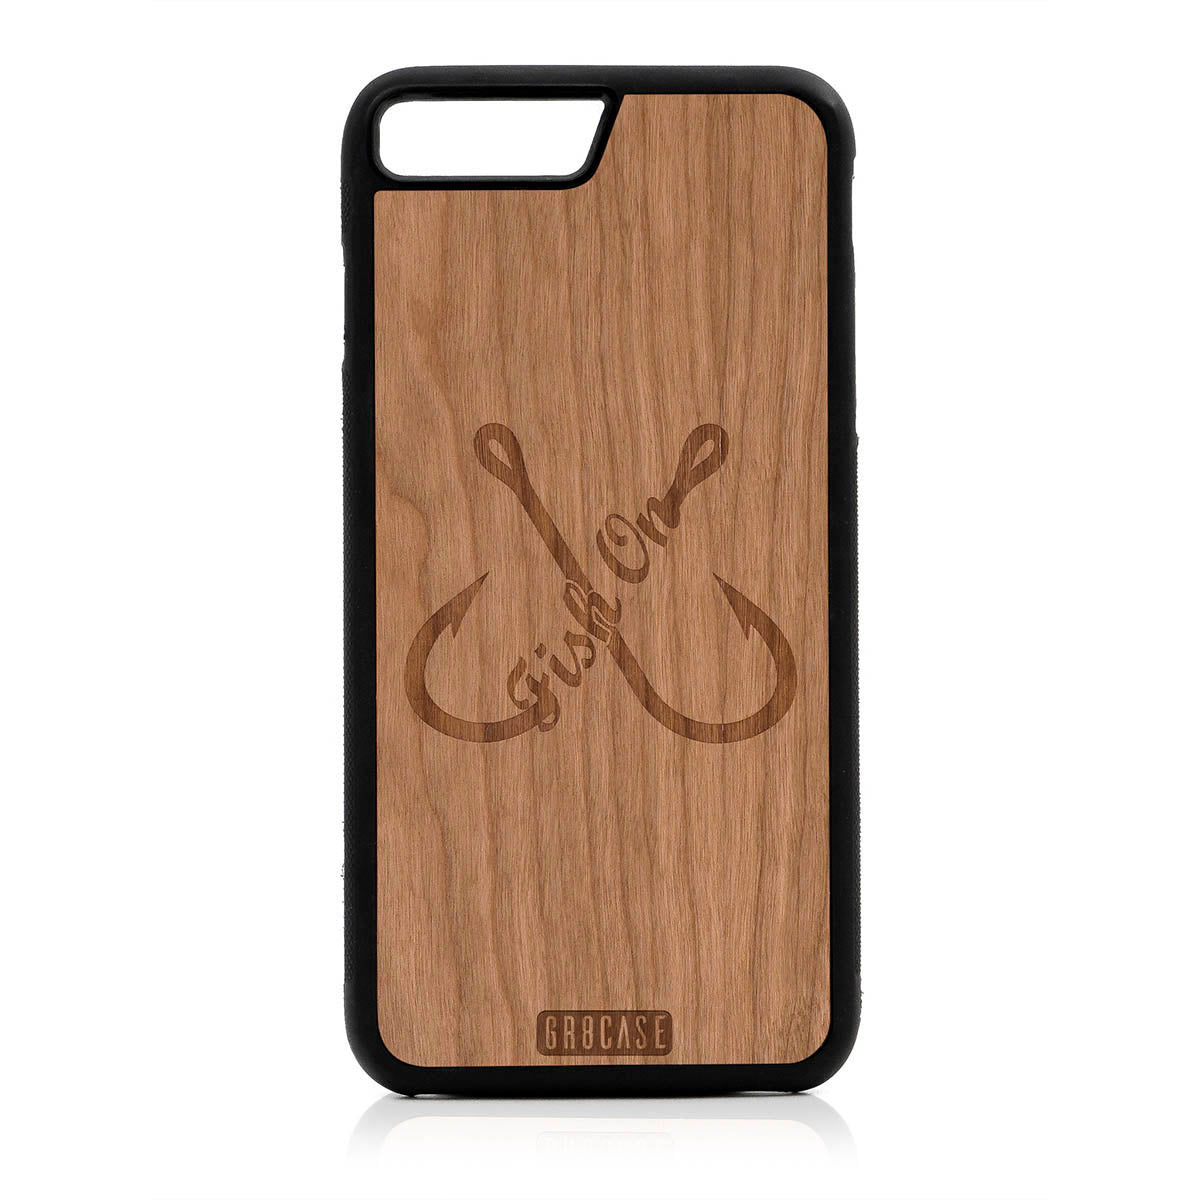 Fish On (Fish Hooks) Design Wood Case For iPhone 7 Plus / 8 Plus by GR8CASE